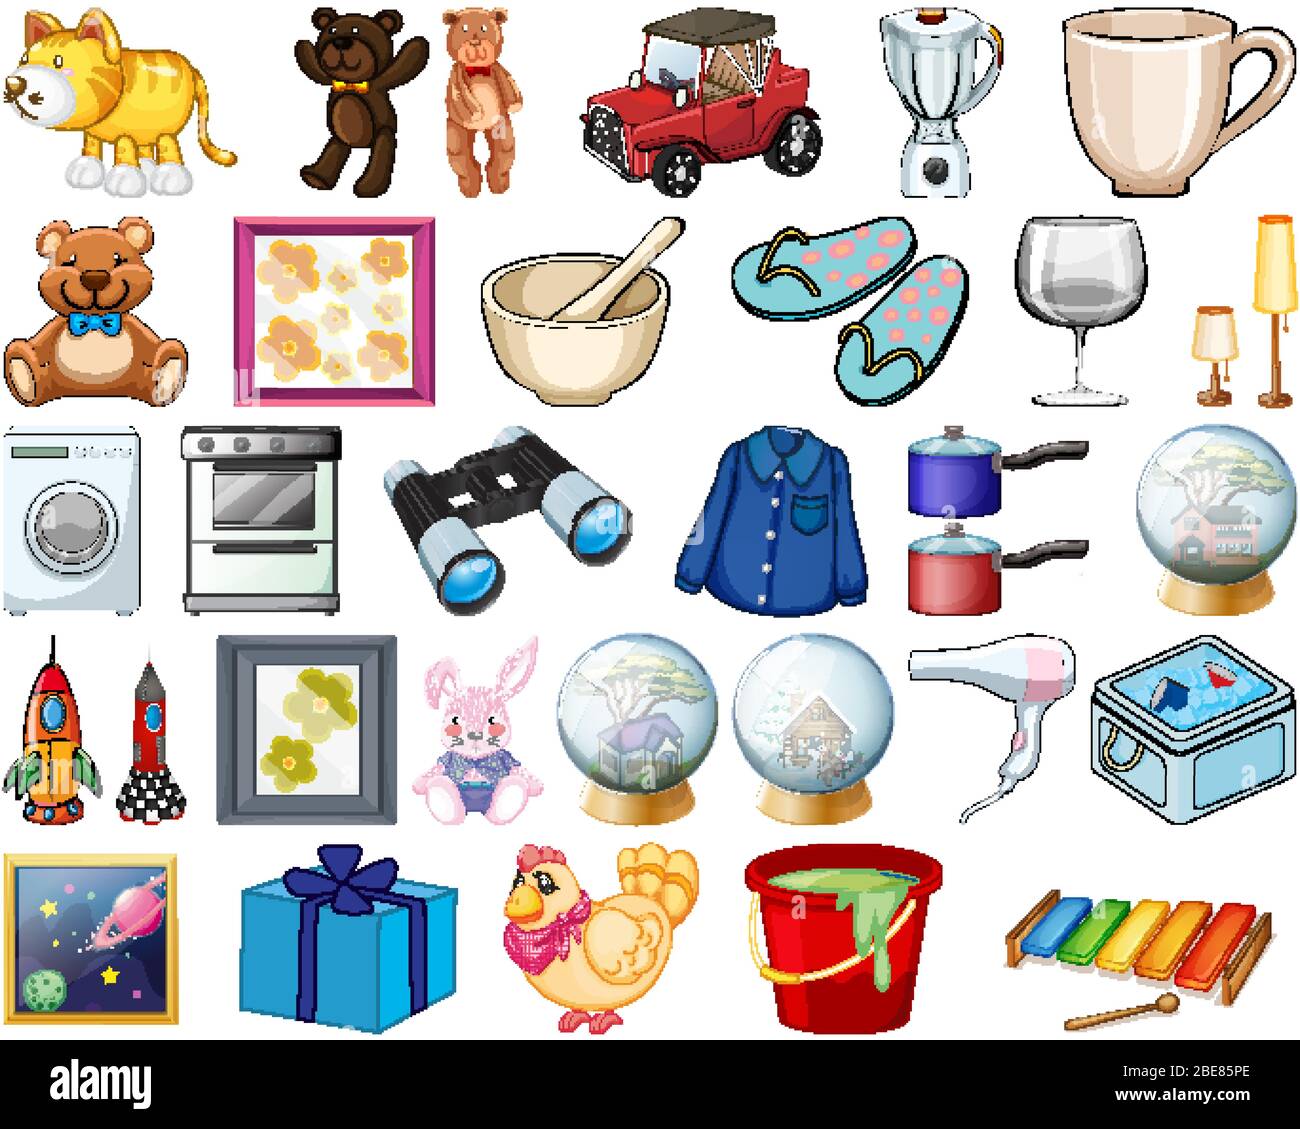 https://c8.alamy.com/comp/2BE85PE/large-set-of-household-items-and-many-toys-on-white-background-illustration-2BE85PE.jpg